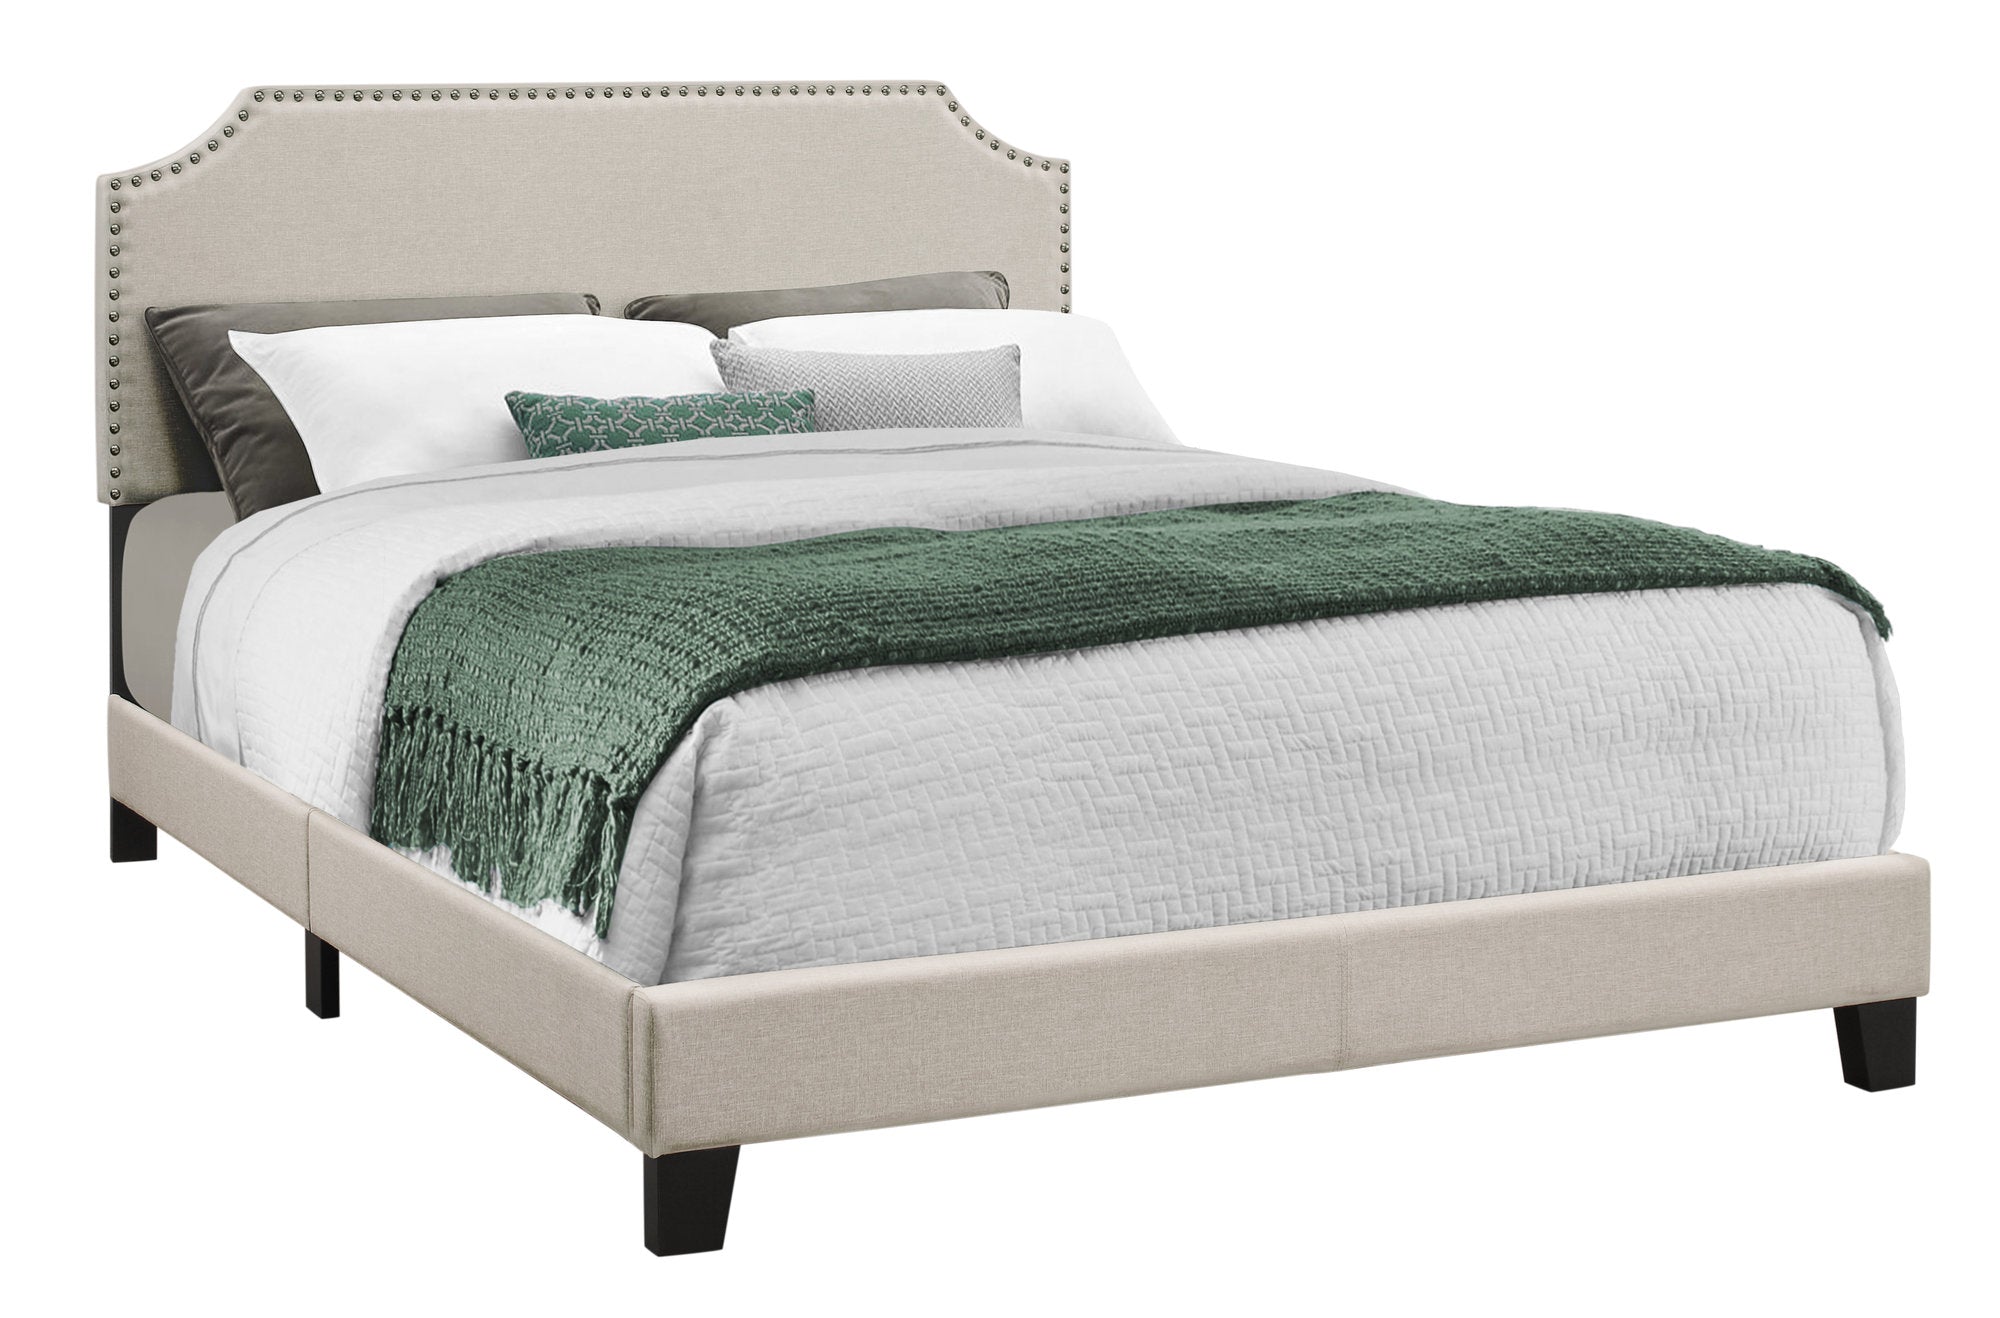 BED - QUEEN SIZE / GREY LINEN WITH CHROME TRIM